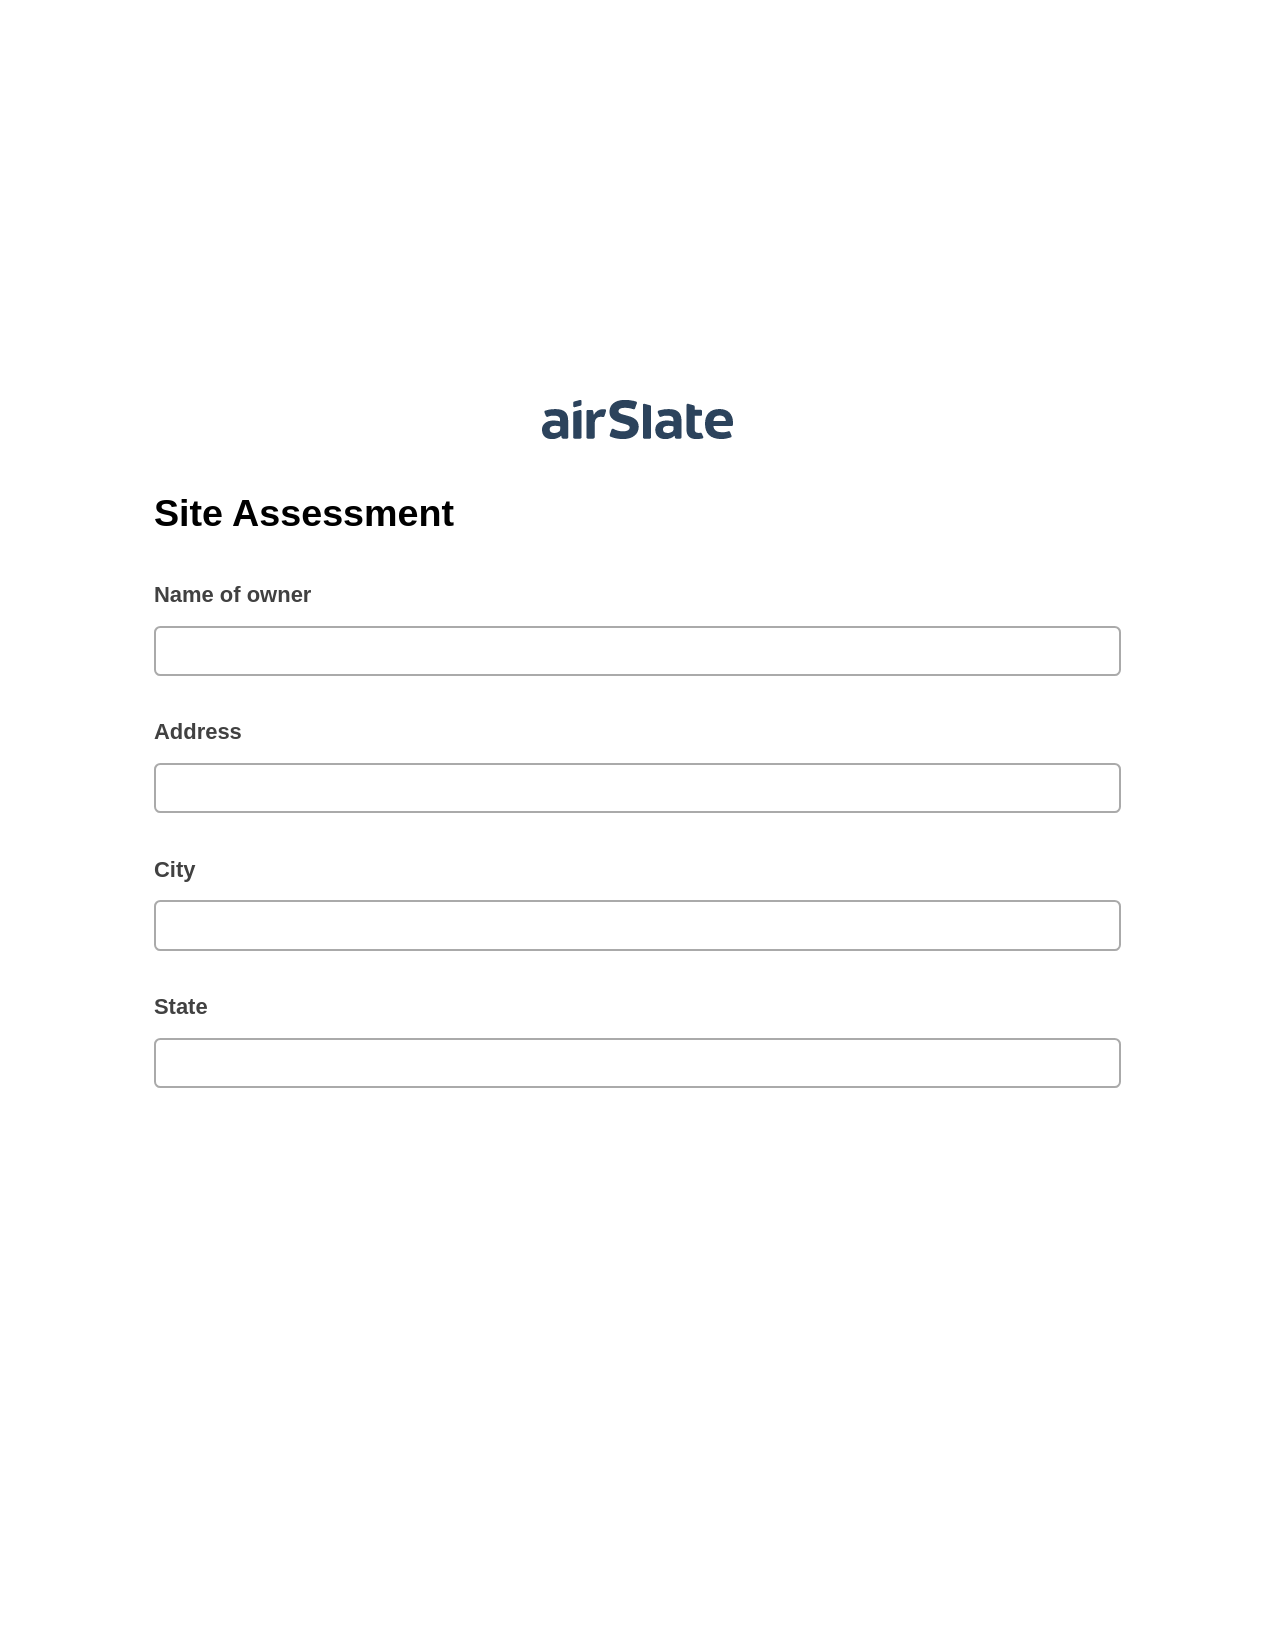 Site Assessment Pre-fill from Excel Spreadsheet Bot, Pre-fill with Custom Data Bot, Export to Excel 365 Bot